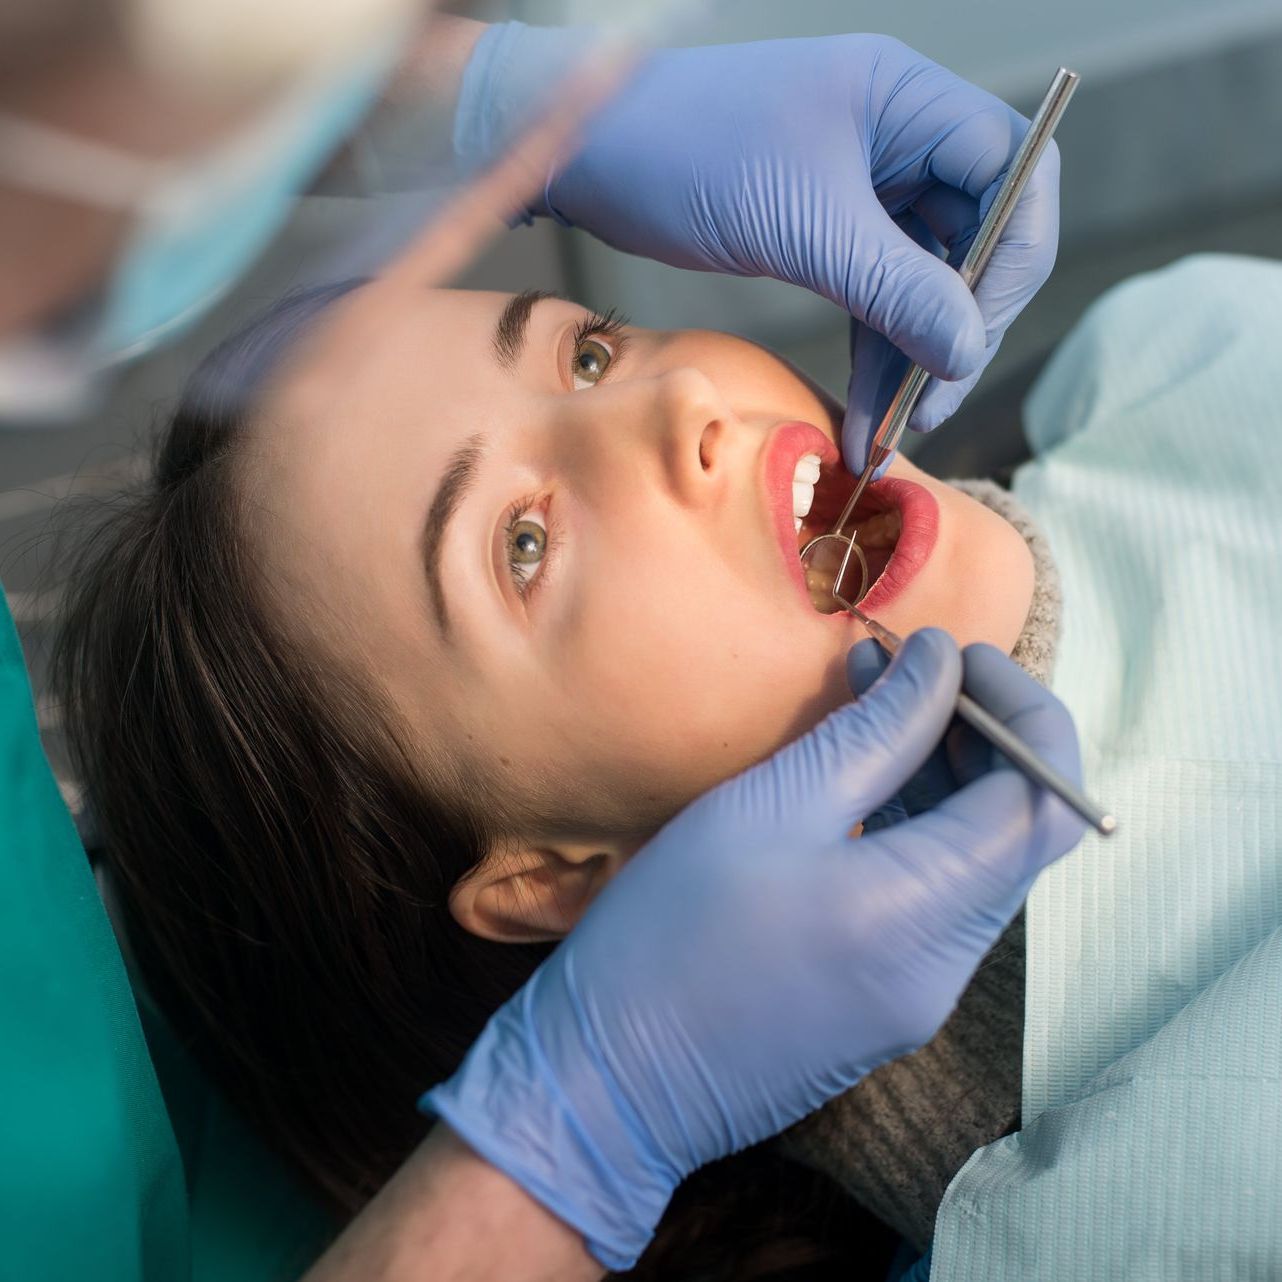 An image of a young woman and a dentist during a dental exam